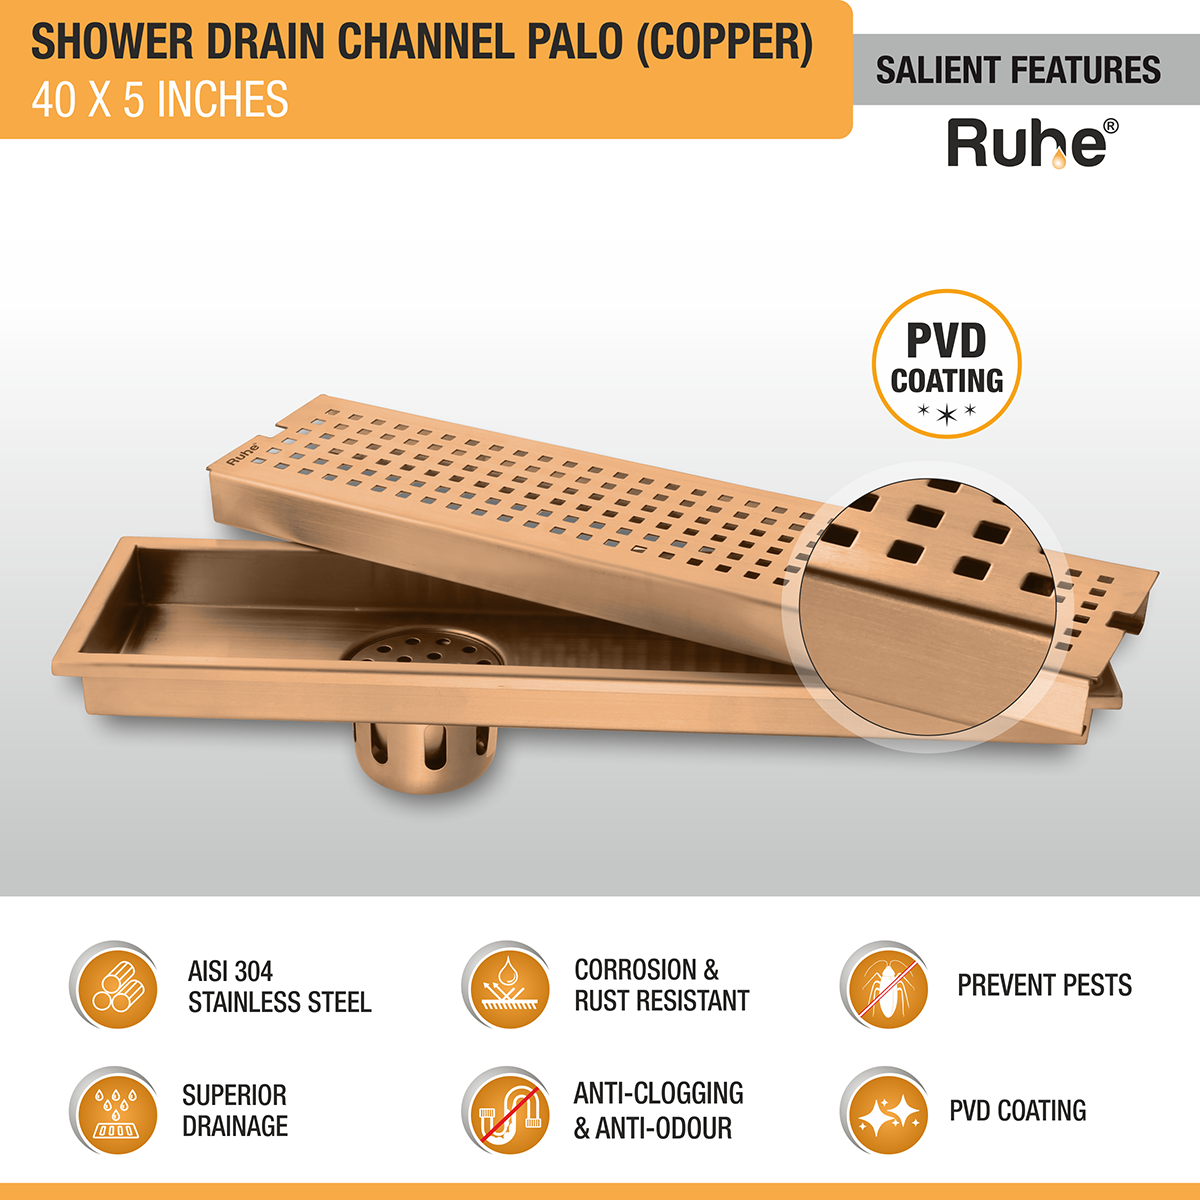 Palo Shower Drain Channel (40 x 5 Inches) ROSE GOLD/ANTIQUE COPPER features